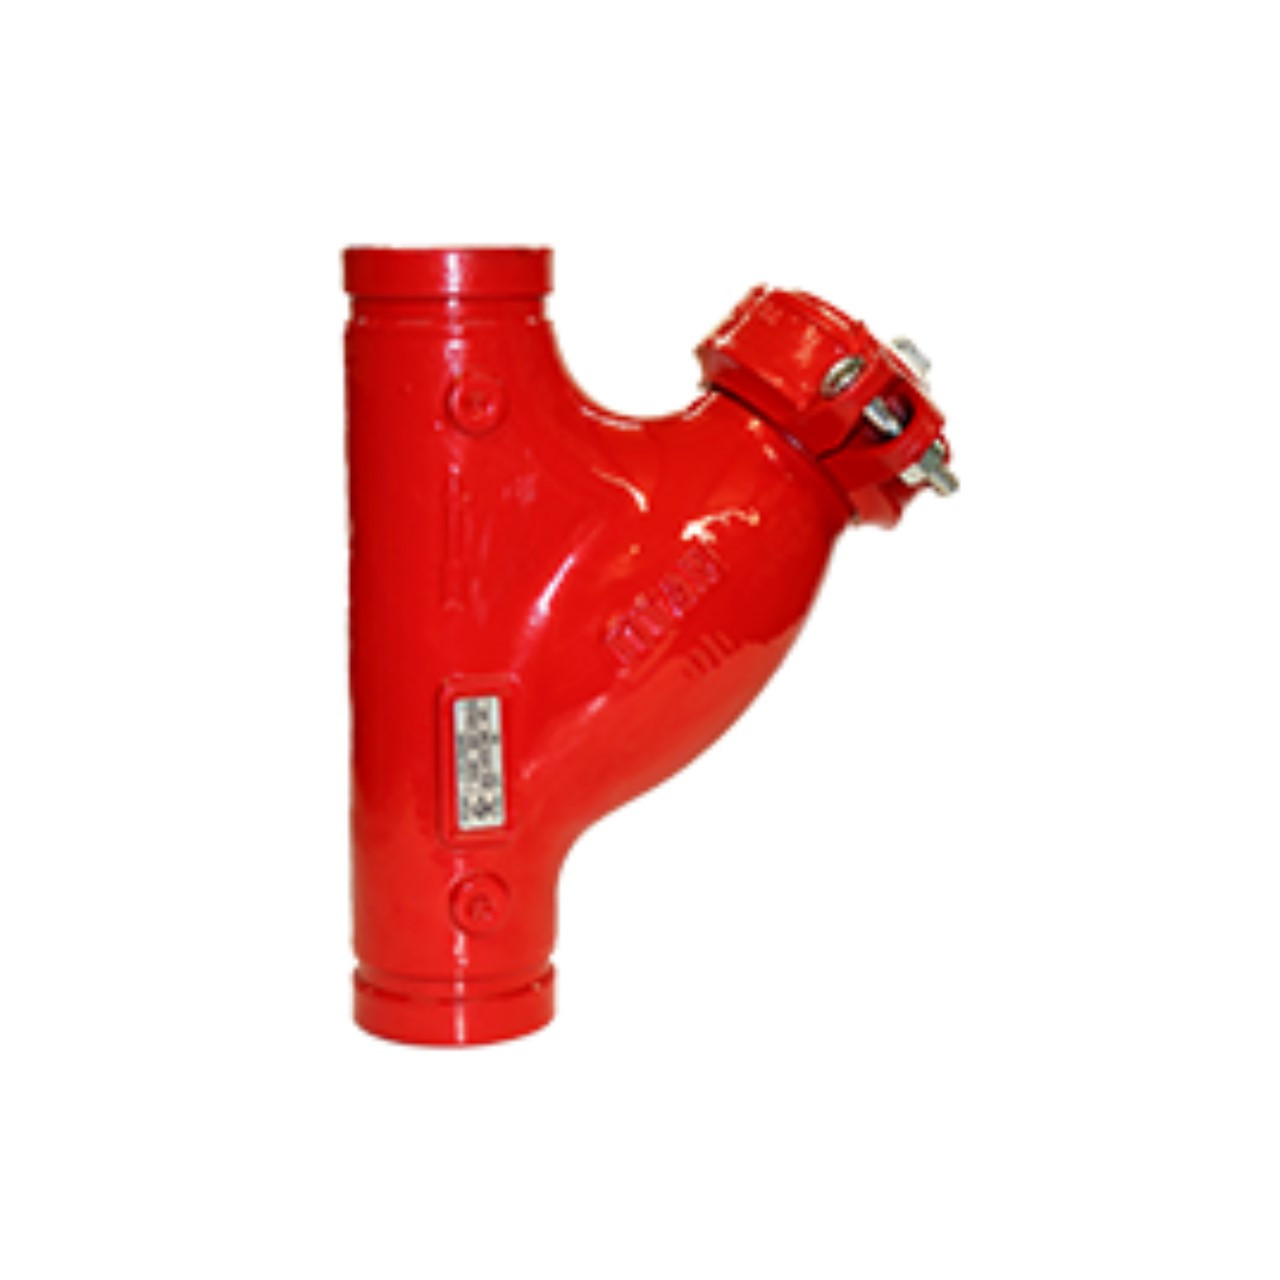 Titan Flow Control YS58UG-DI 8 in. 300 WOG Ductile Iron Grooved End  Y-Strainer - UL/FM Approved (Fire Protection)